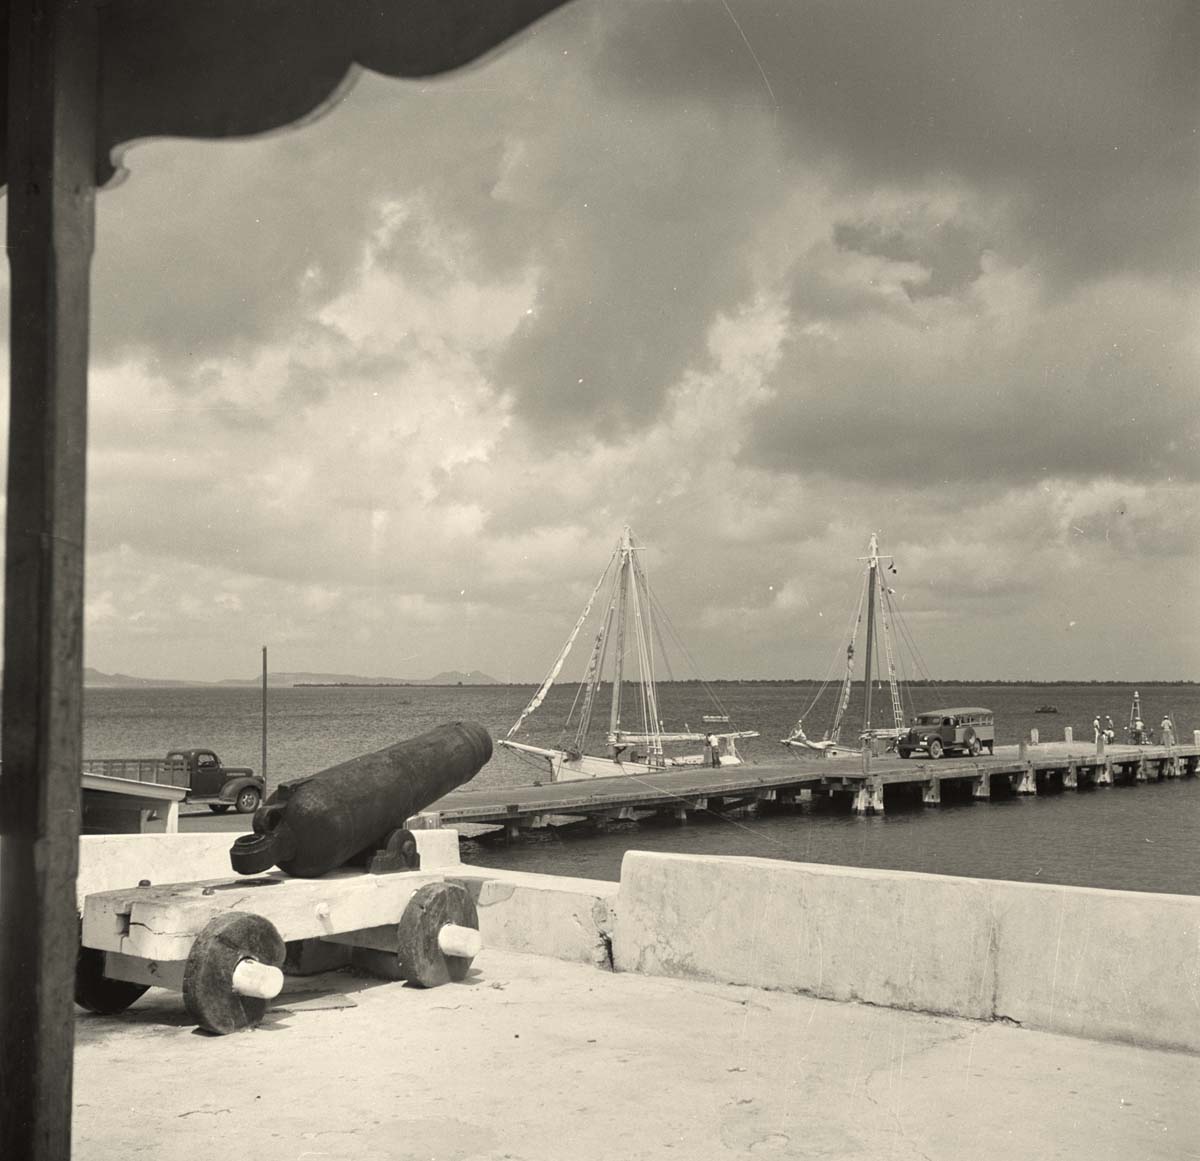 Boats in the bay of Kralendijk, old cannon, 1947